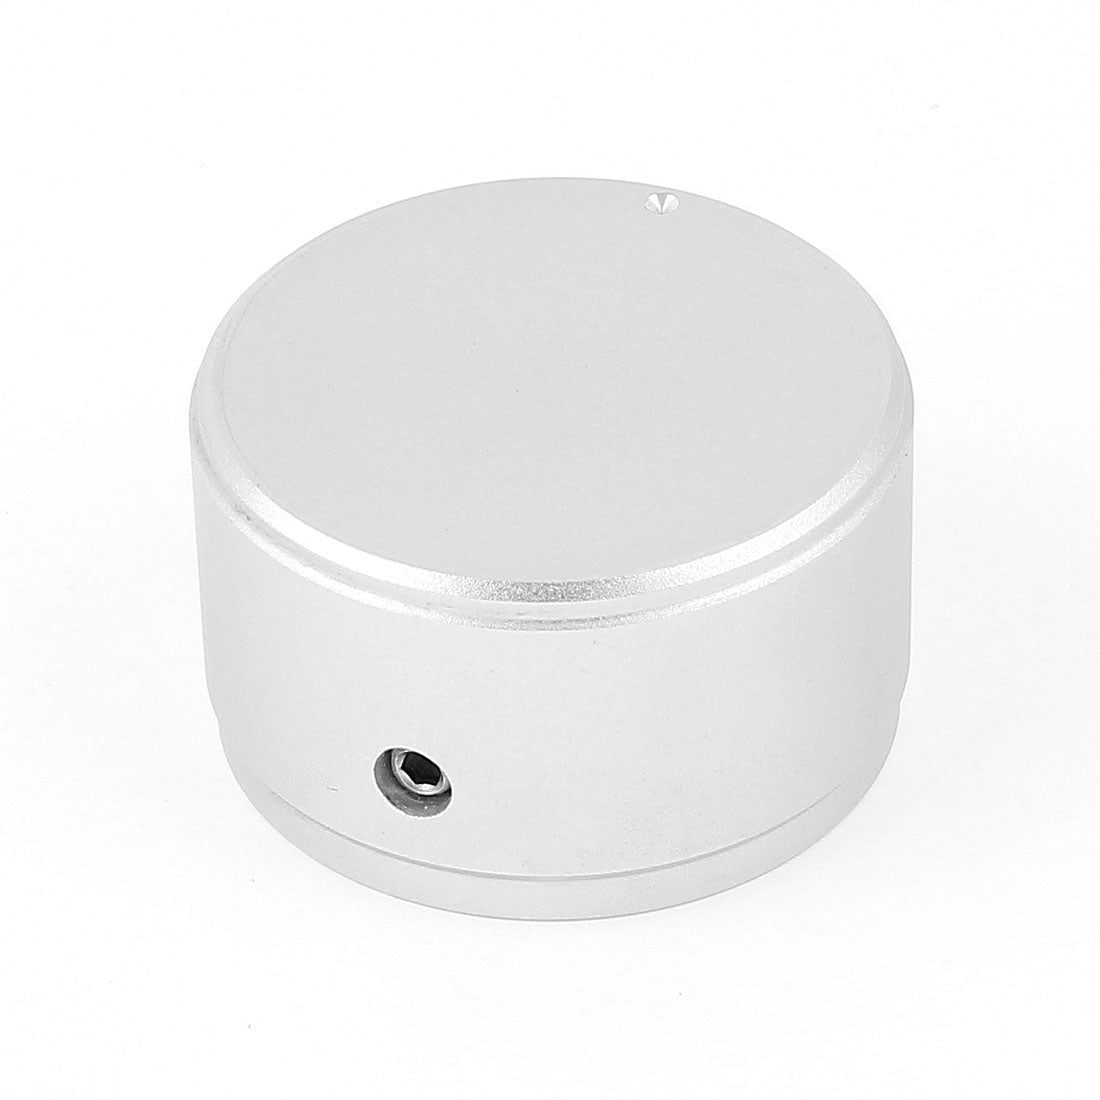 uxcell Uxcell 38mm x 22mm Aluminium Alloy Volume Control Knob for 6mm Potentiometer Shaft